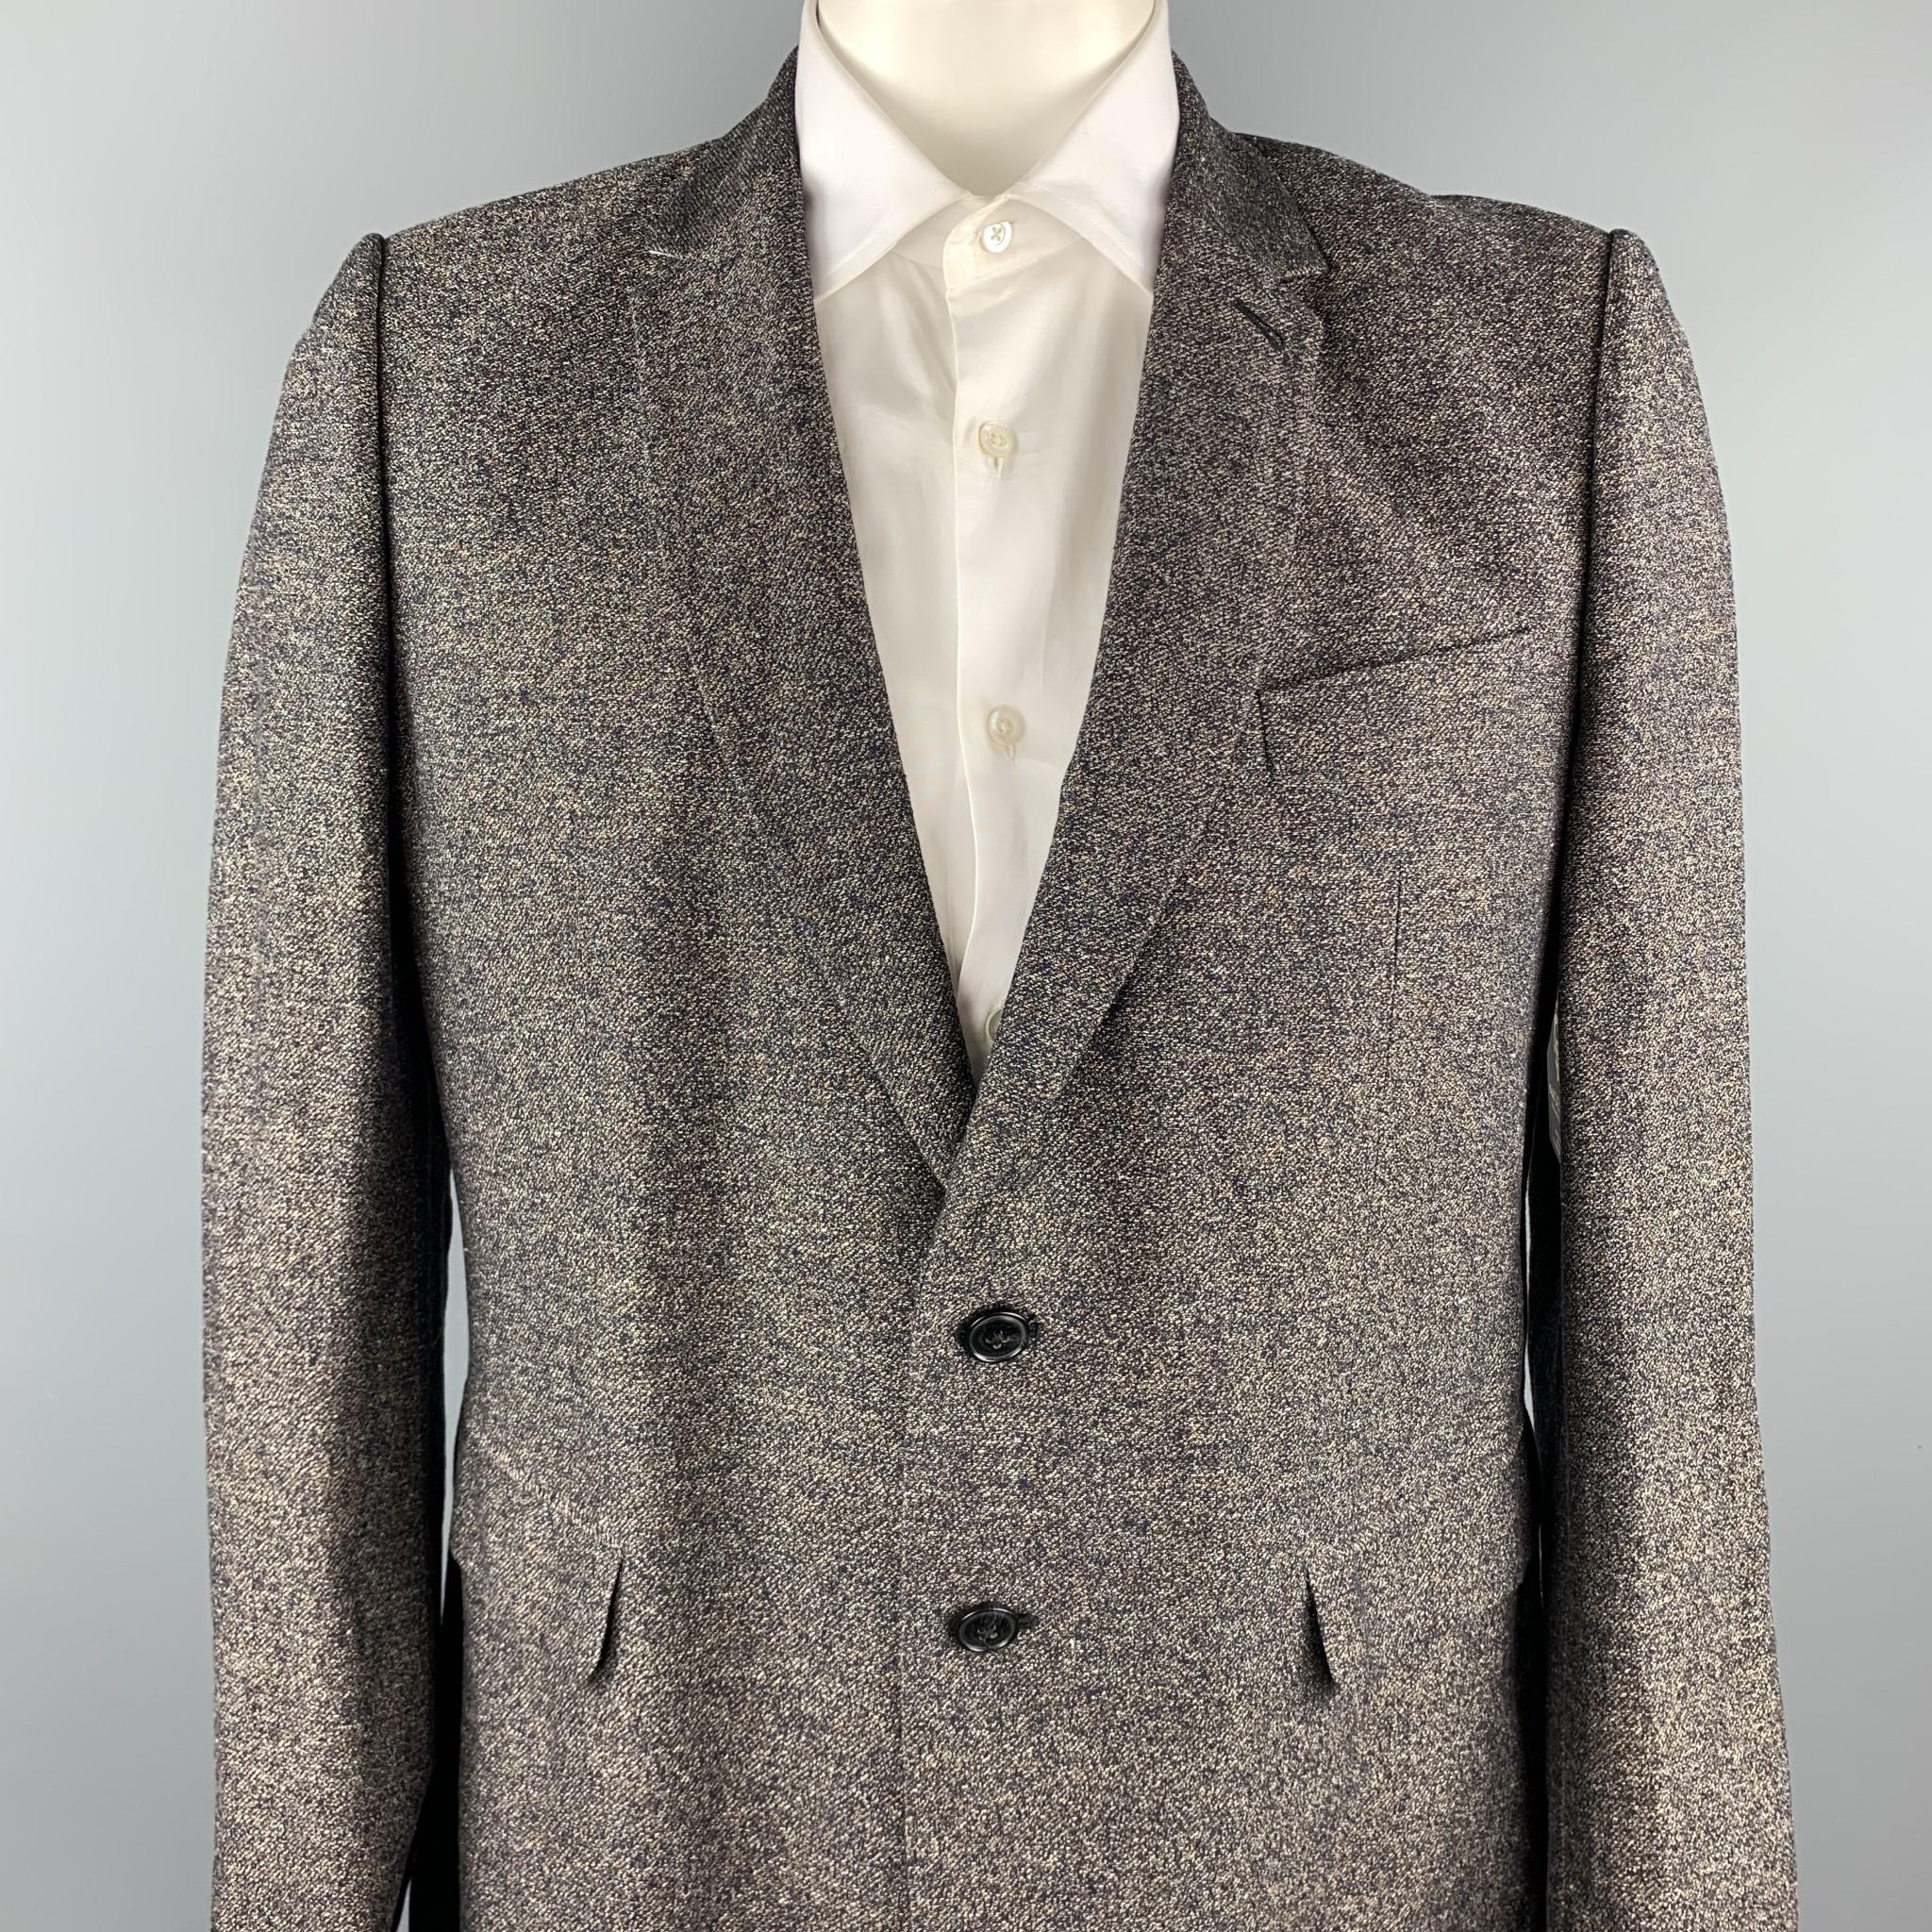 DRIES VAN NOTEN sport coat comes in a brown heather linen / cotton with a full liner featuring a notch lapel, flap pockets, and a two button closure. 

Excellent Pre-Owned Condition.
Marked: 54

Measurements:

Shoulder: 18 in. 
Chest: 44 in.